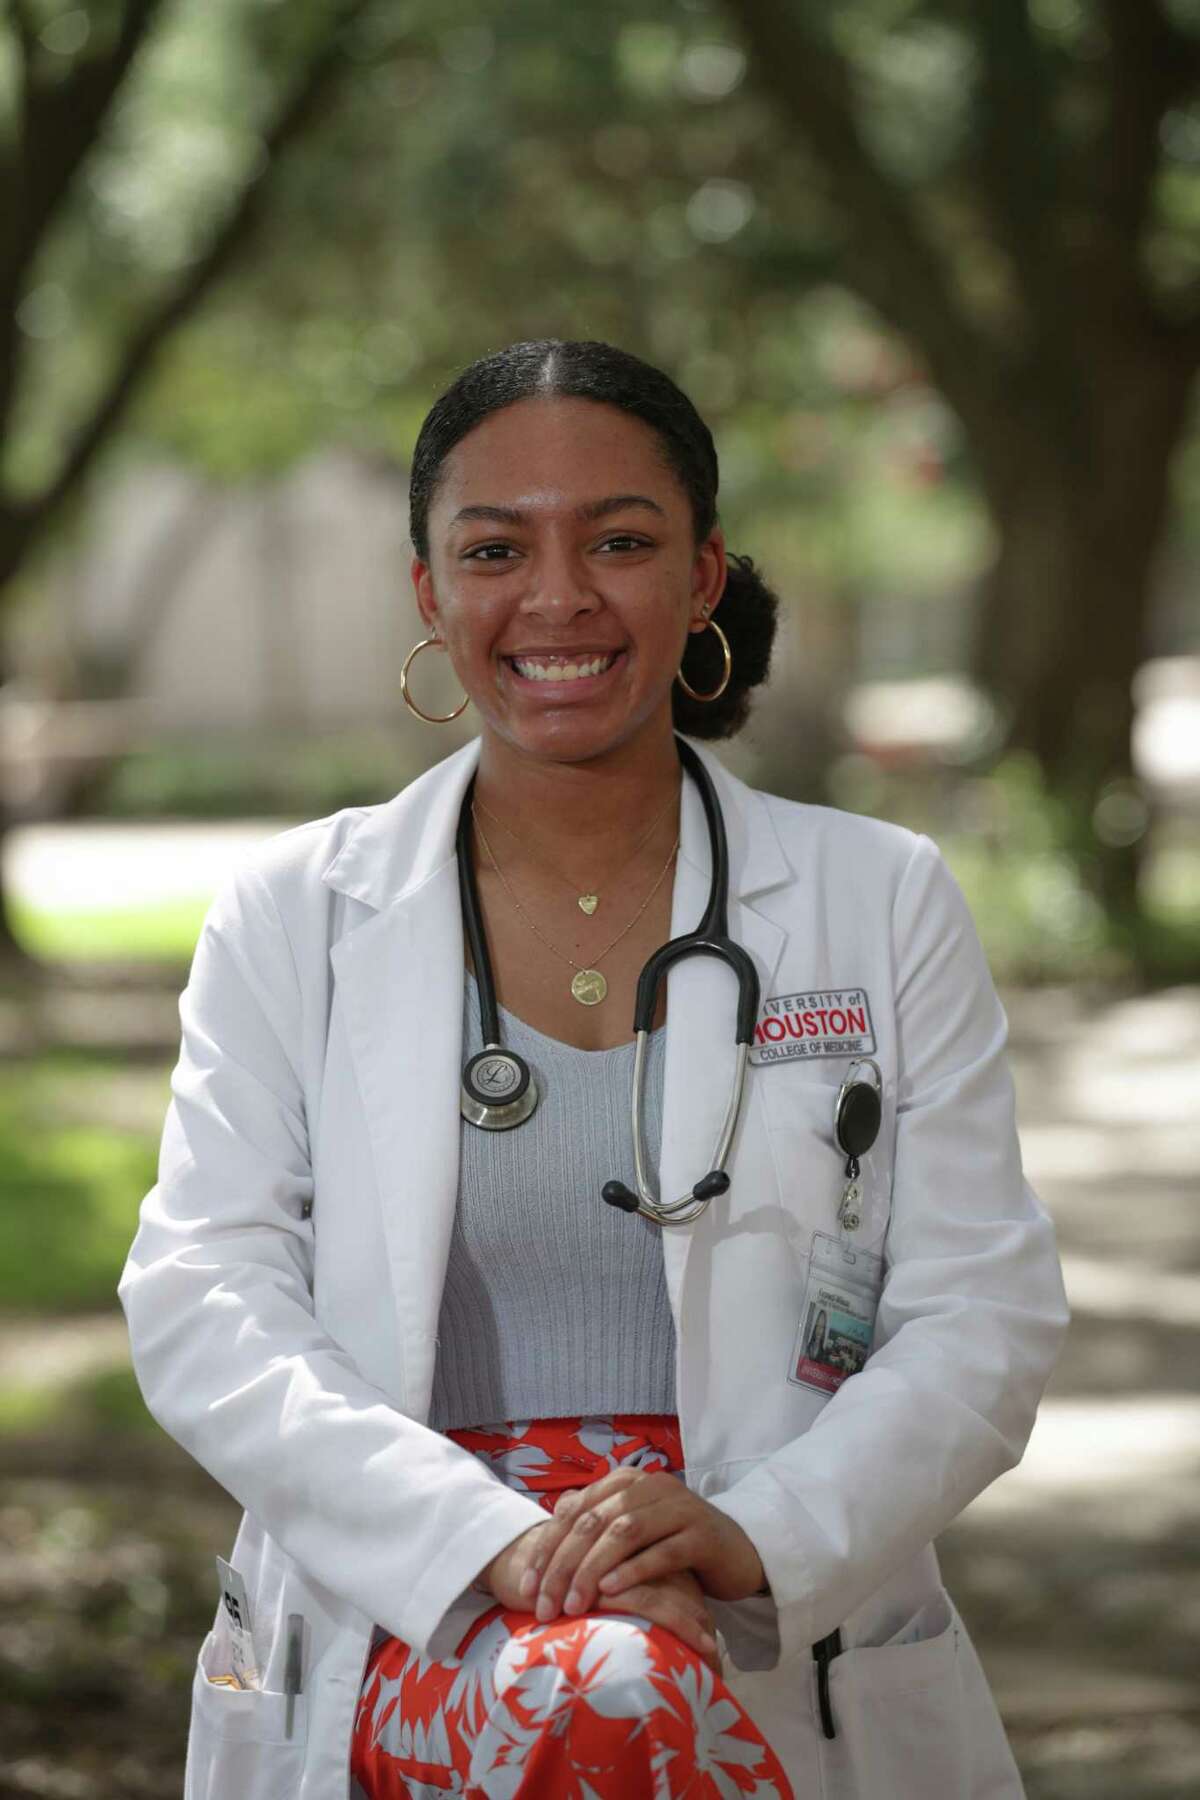 Kennedi Wilson is in the inaugural class of the University of Houston College of Medicine Thursday, June 24, 2021, in Houston.